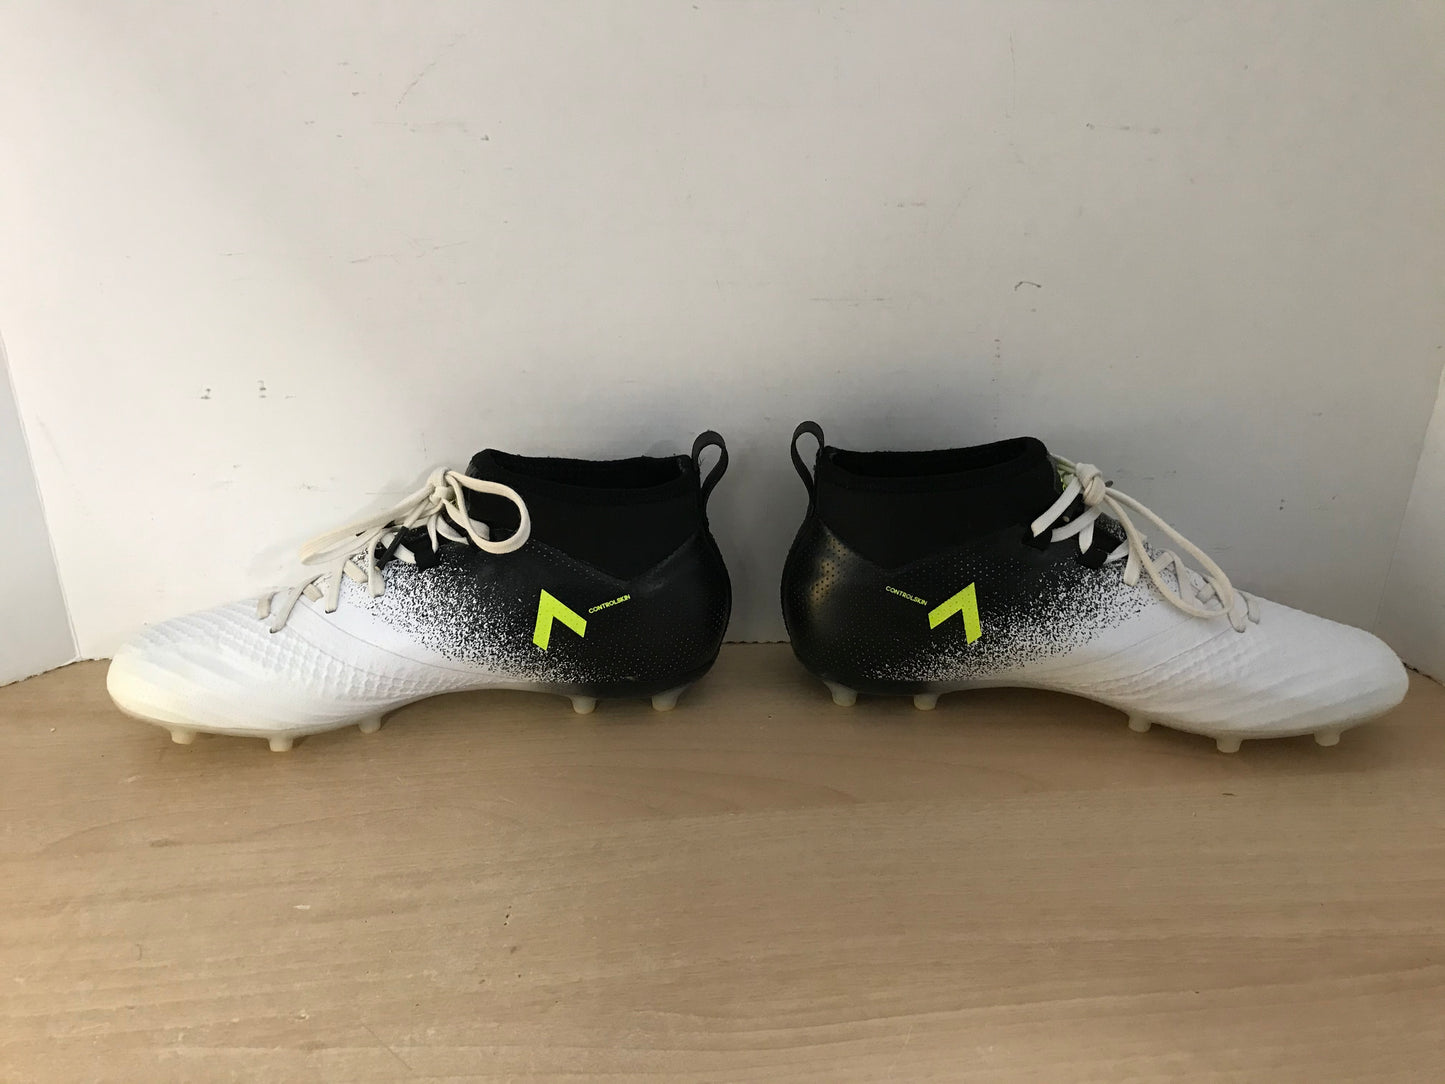 Soccer Shoes Cleats Child Size 6 Adidas Control Skin Slipper Foot White Black Lime New Demo Model